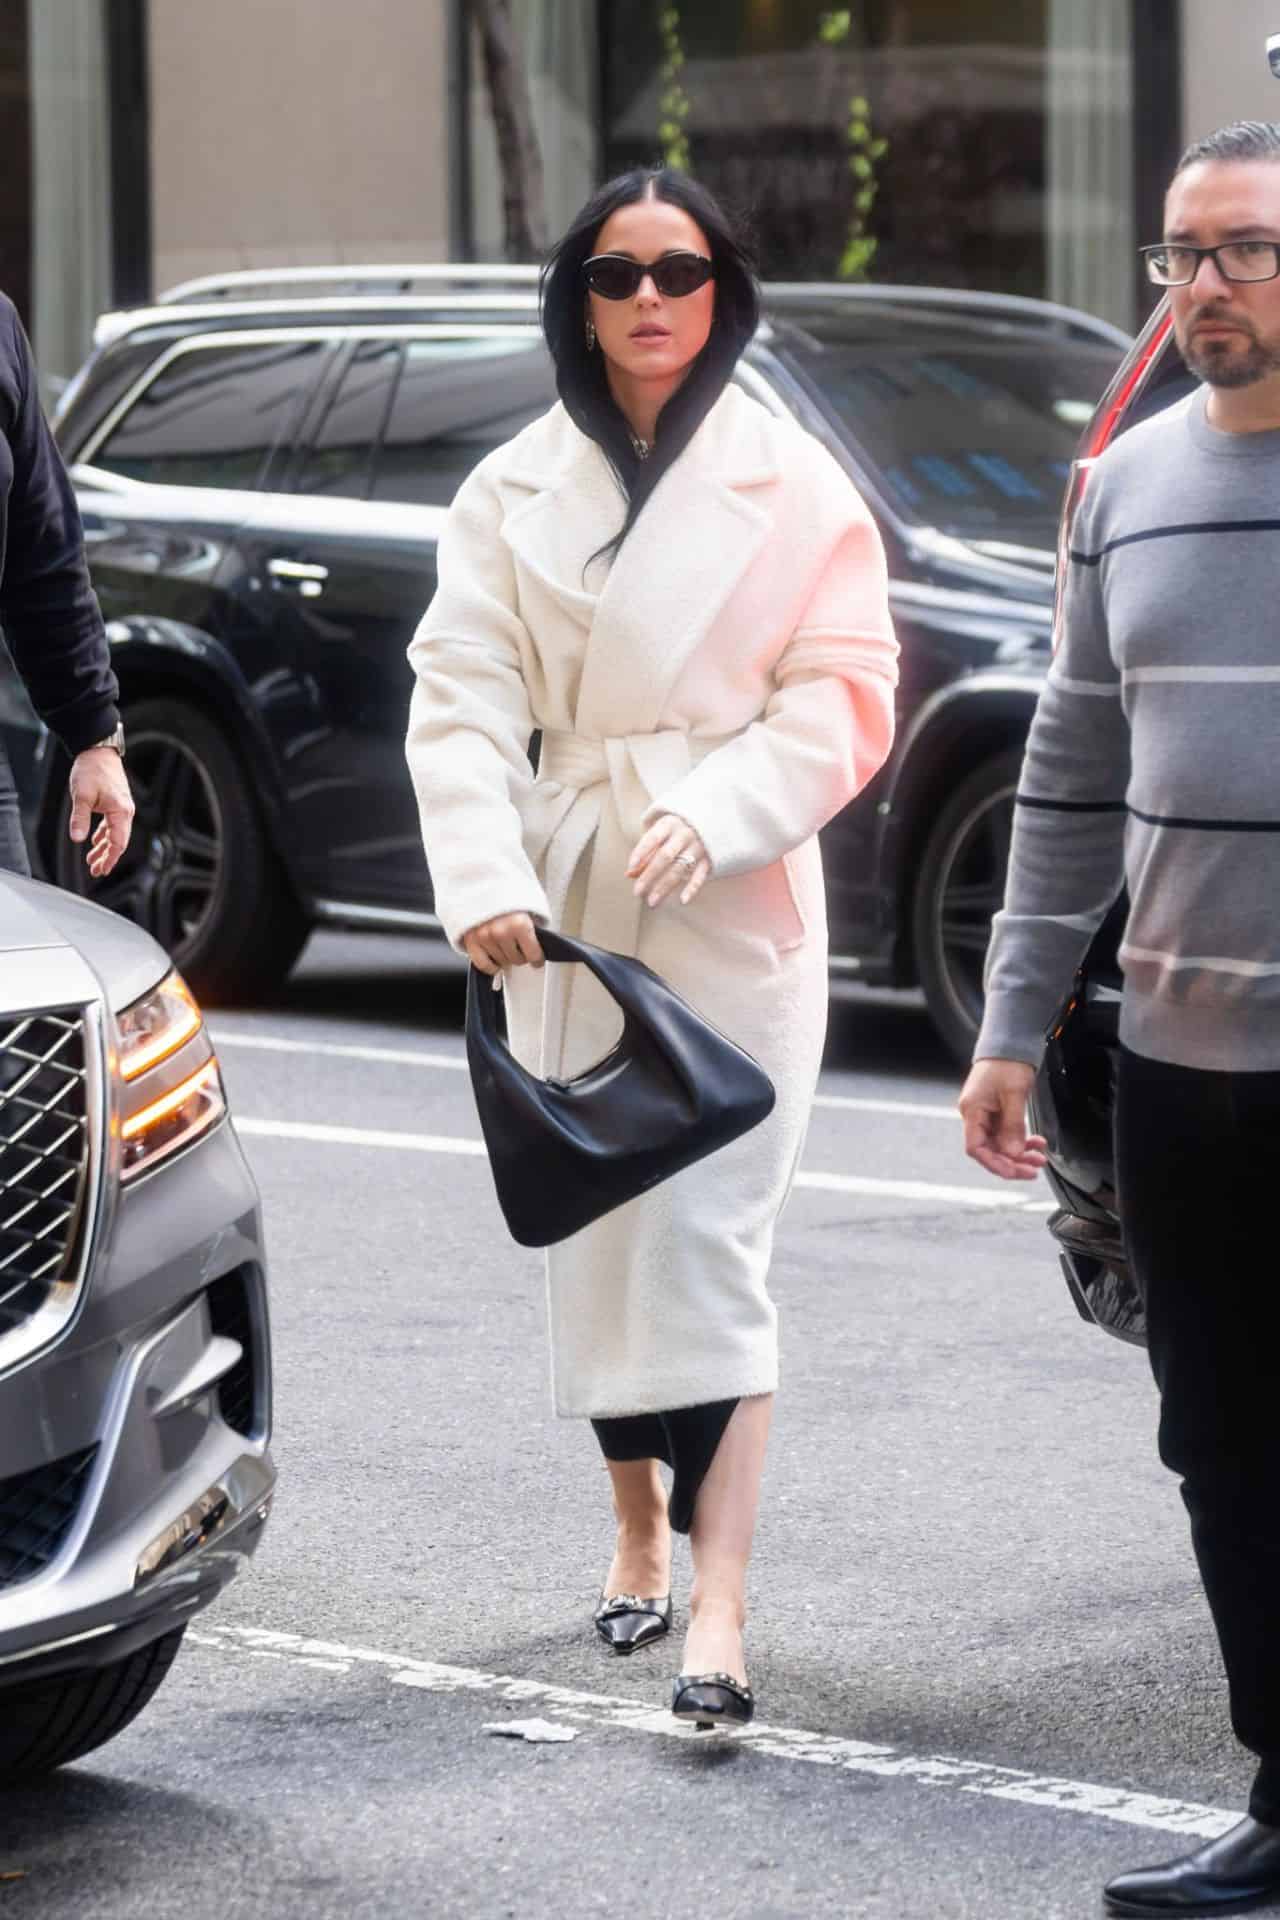 Katy Perry is Effortlessly Stylish in a White Wool Coat and Black Heels